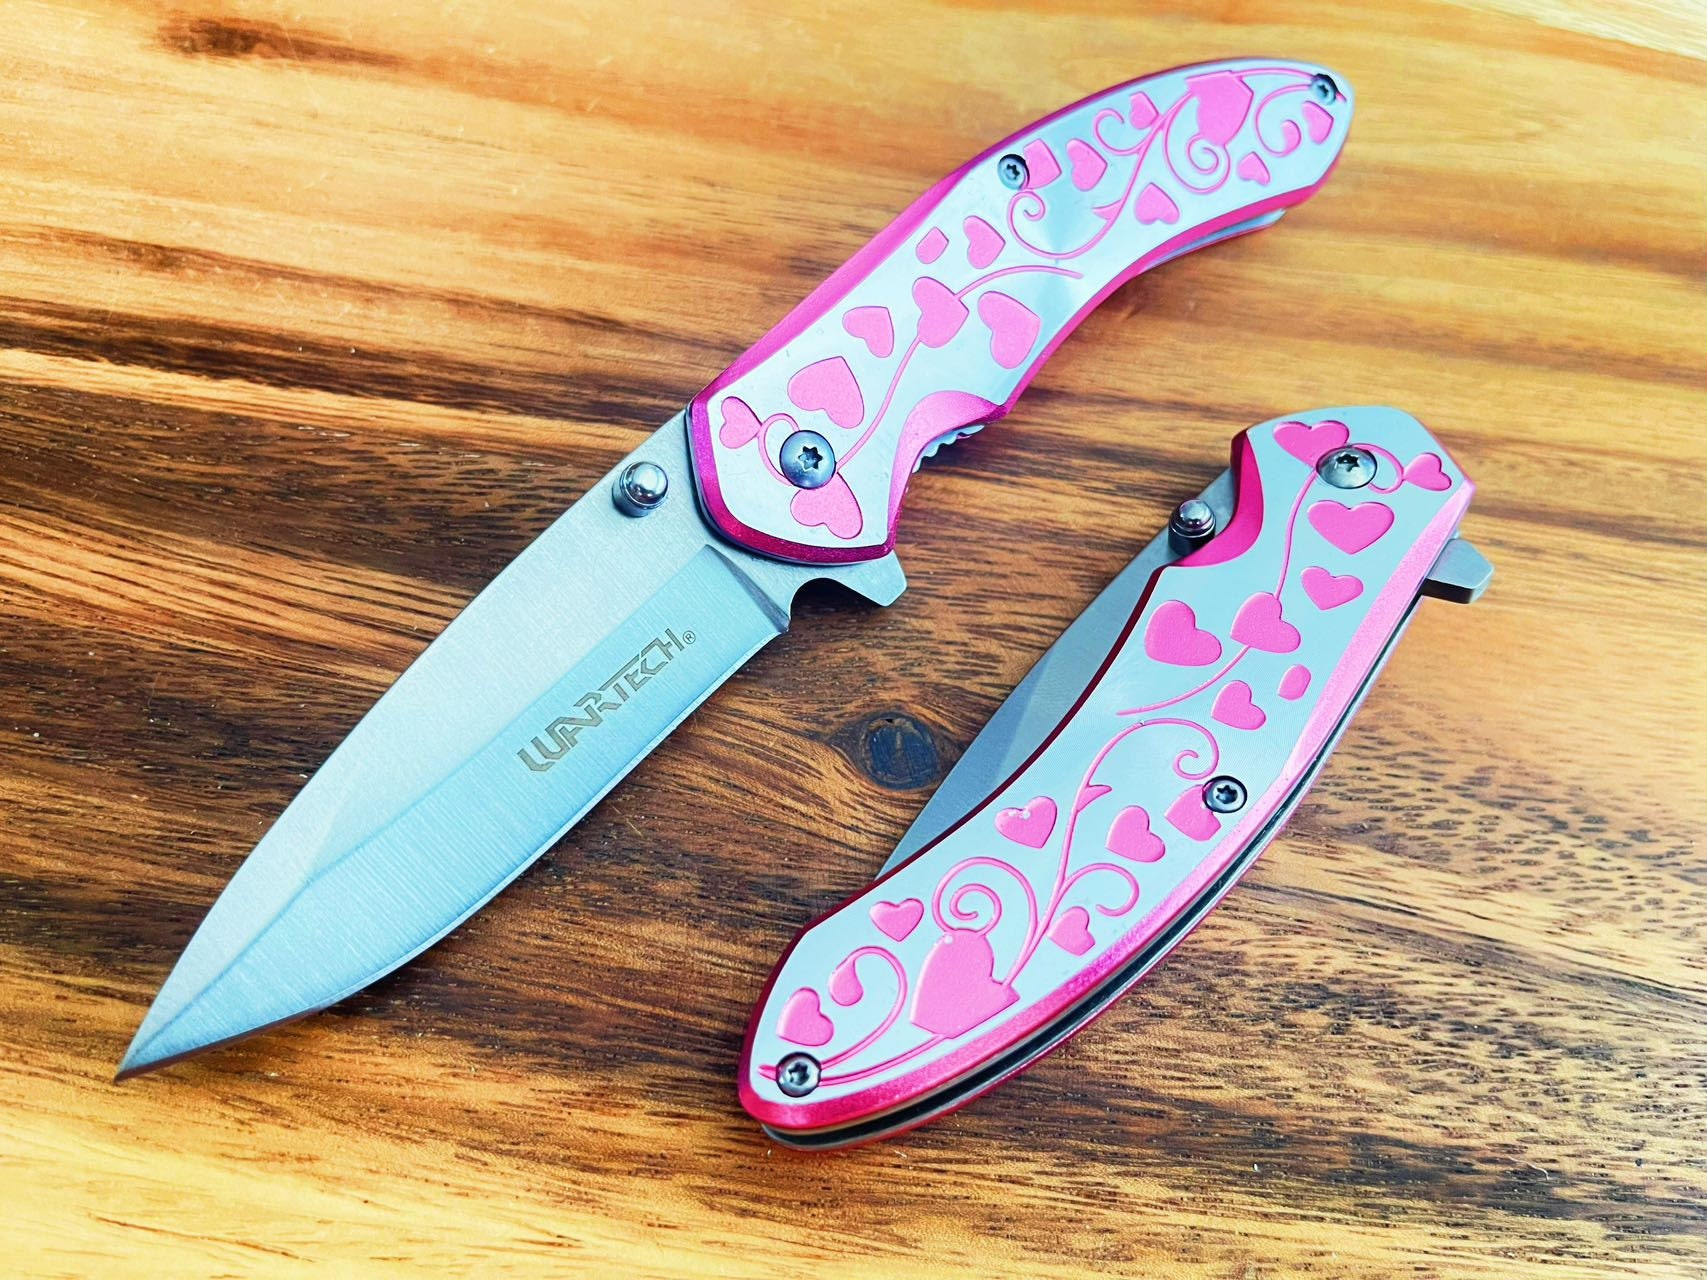  Pink Pocket Knife for Women - Legal Small Knife - 2.68 Inch  Serrated Blade - Womens Knife for Self Defense - Cute Girl Knife - Survival  Tool Pocket & Folding Knives 